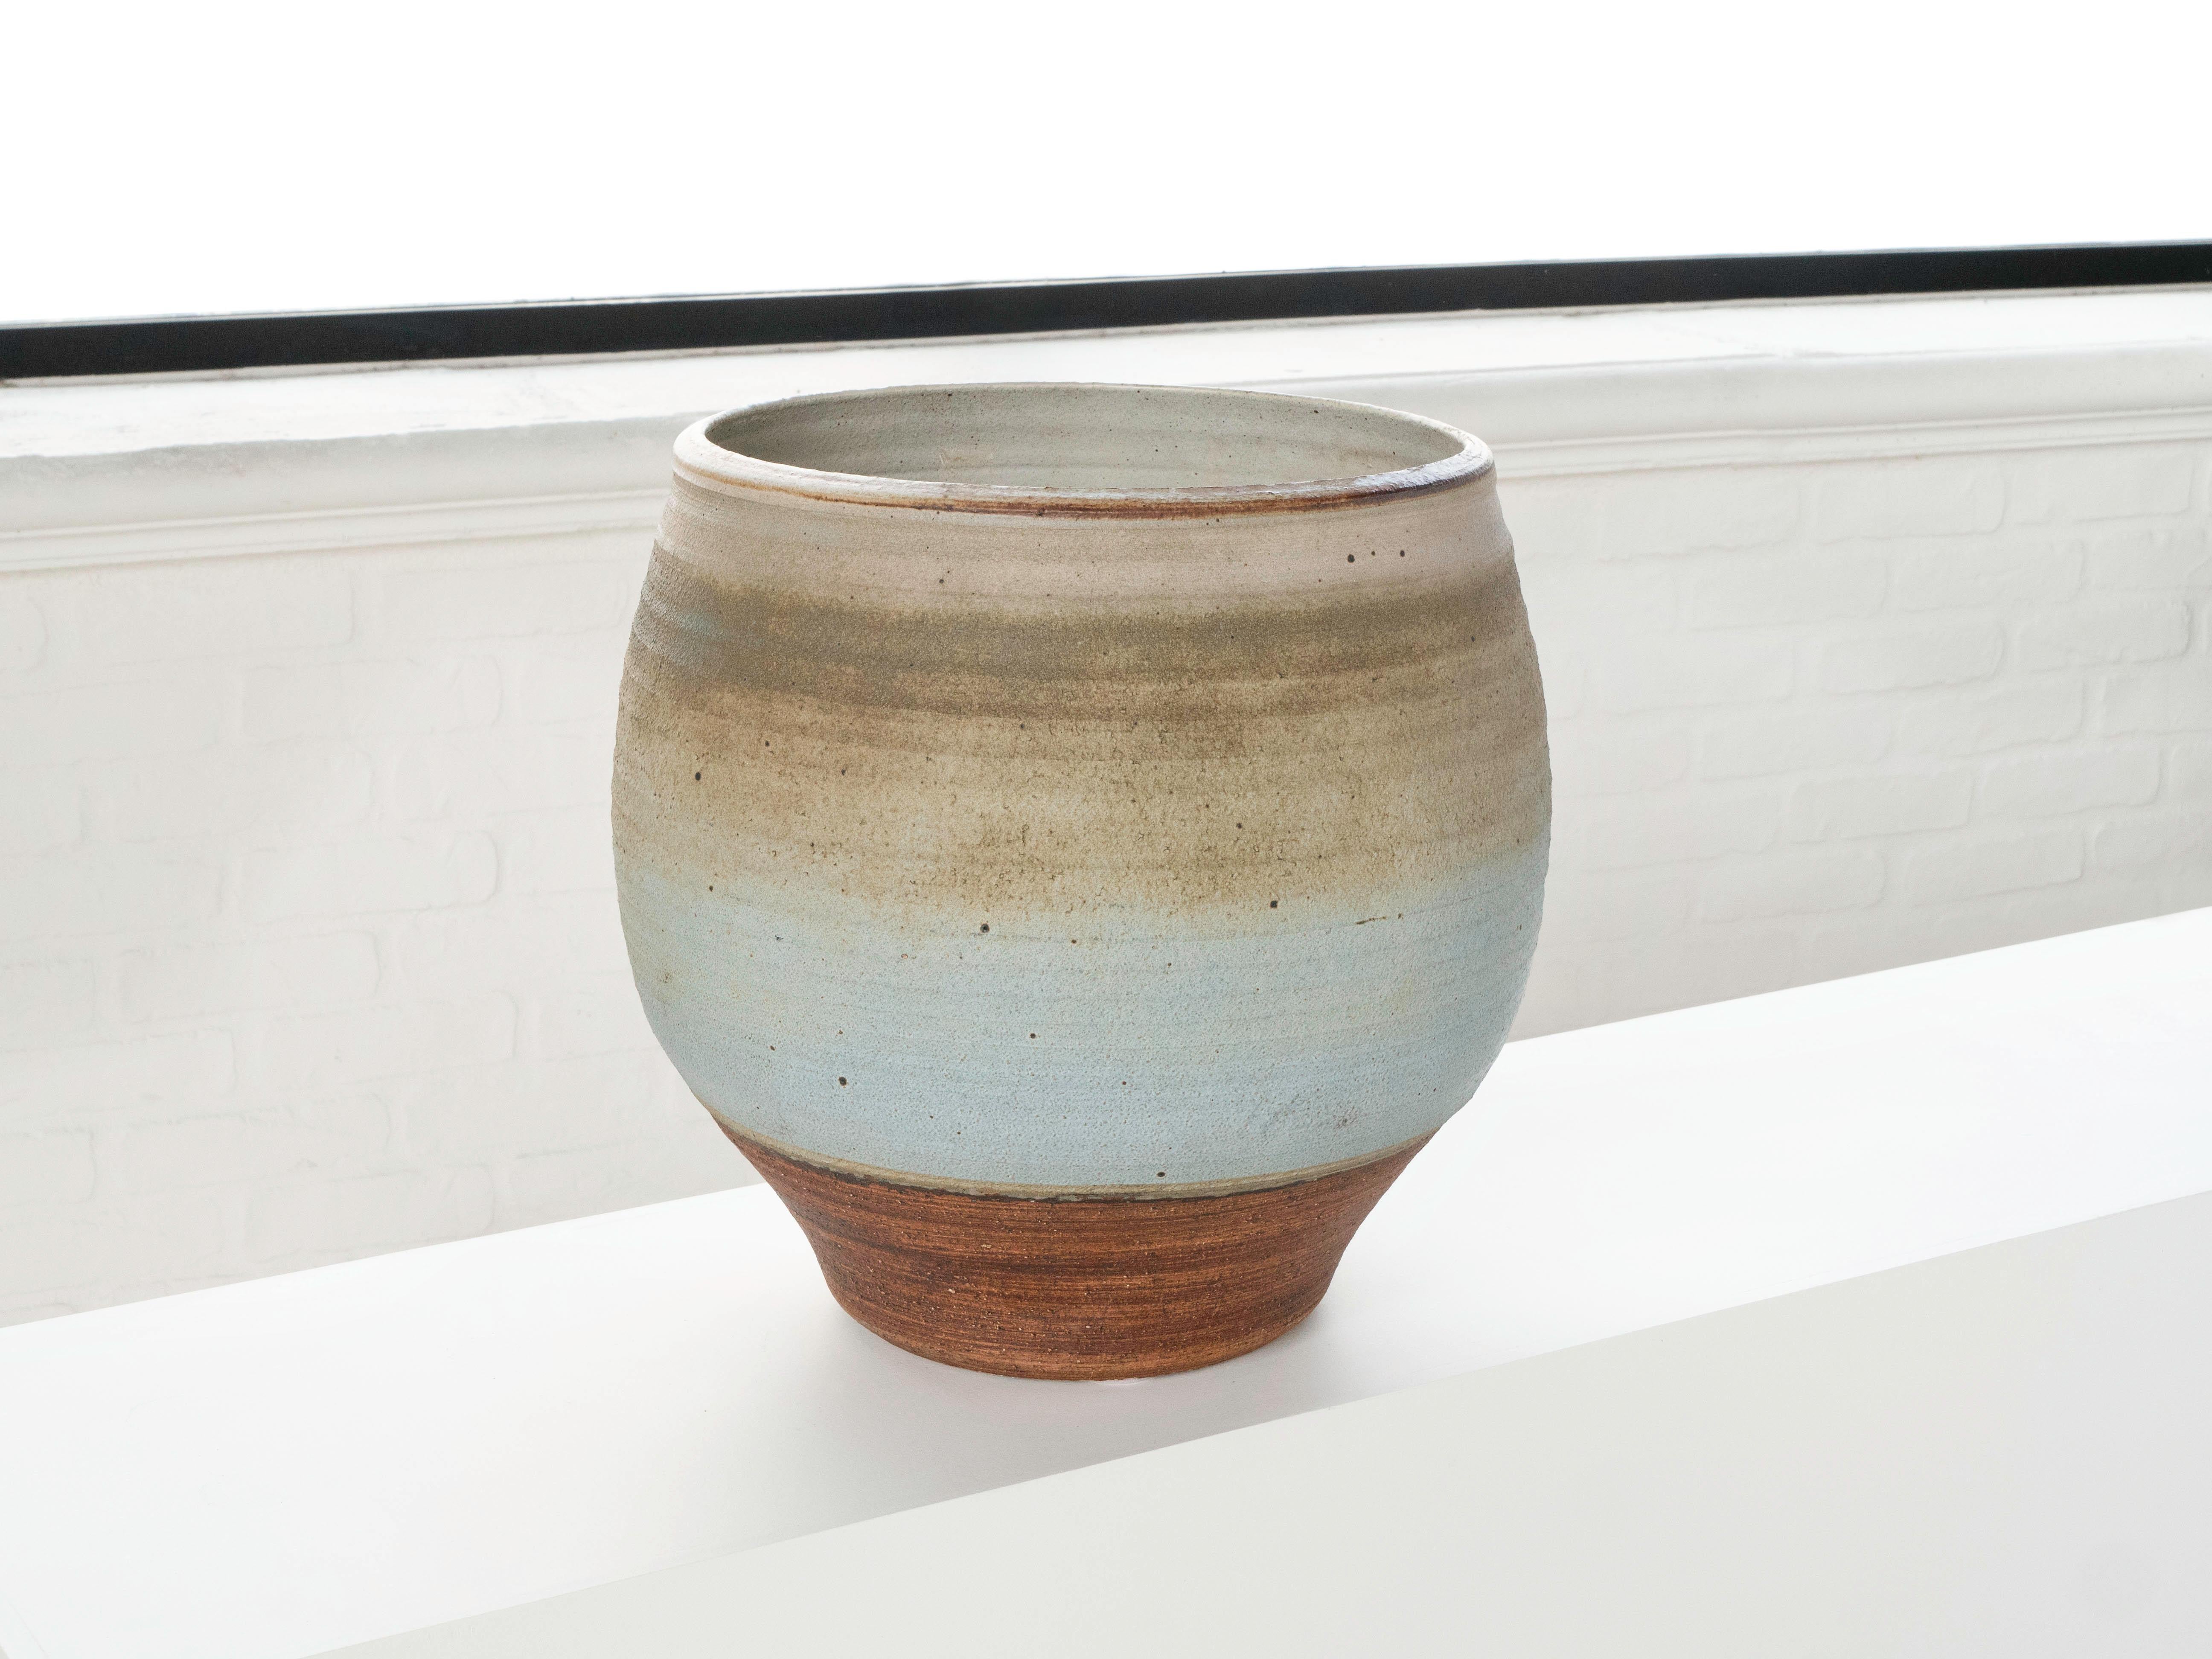 A large hand thrown planter by ceramist Bob Kinzie for his company Affiliated Craftsmen, California 1960's. The upper portion of the piece has a powder blue tone glaze with espresso colored specks while the bottom portion shows exposed stoneware.